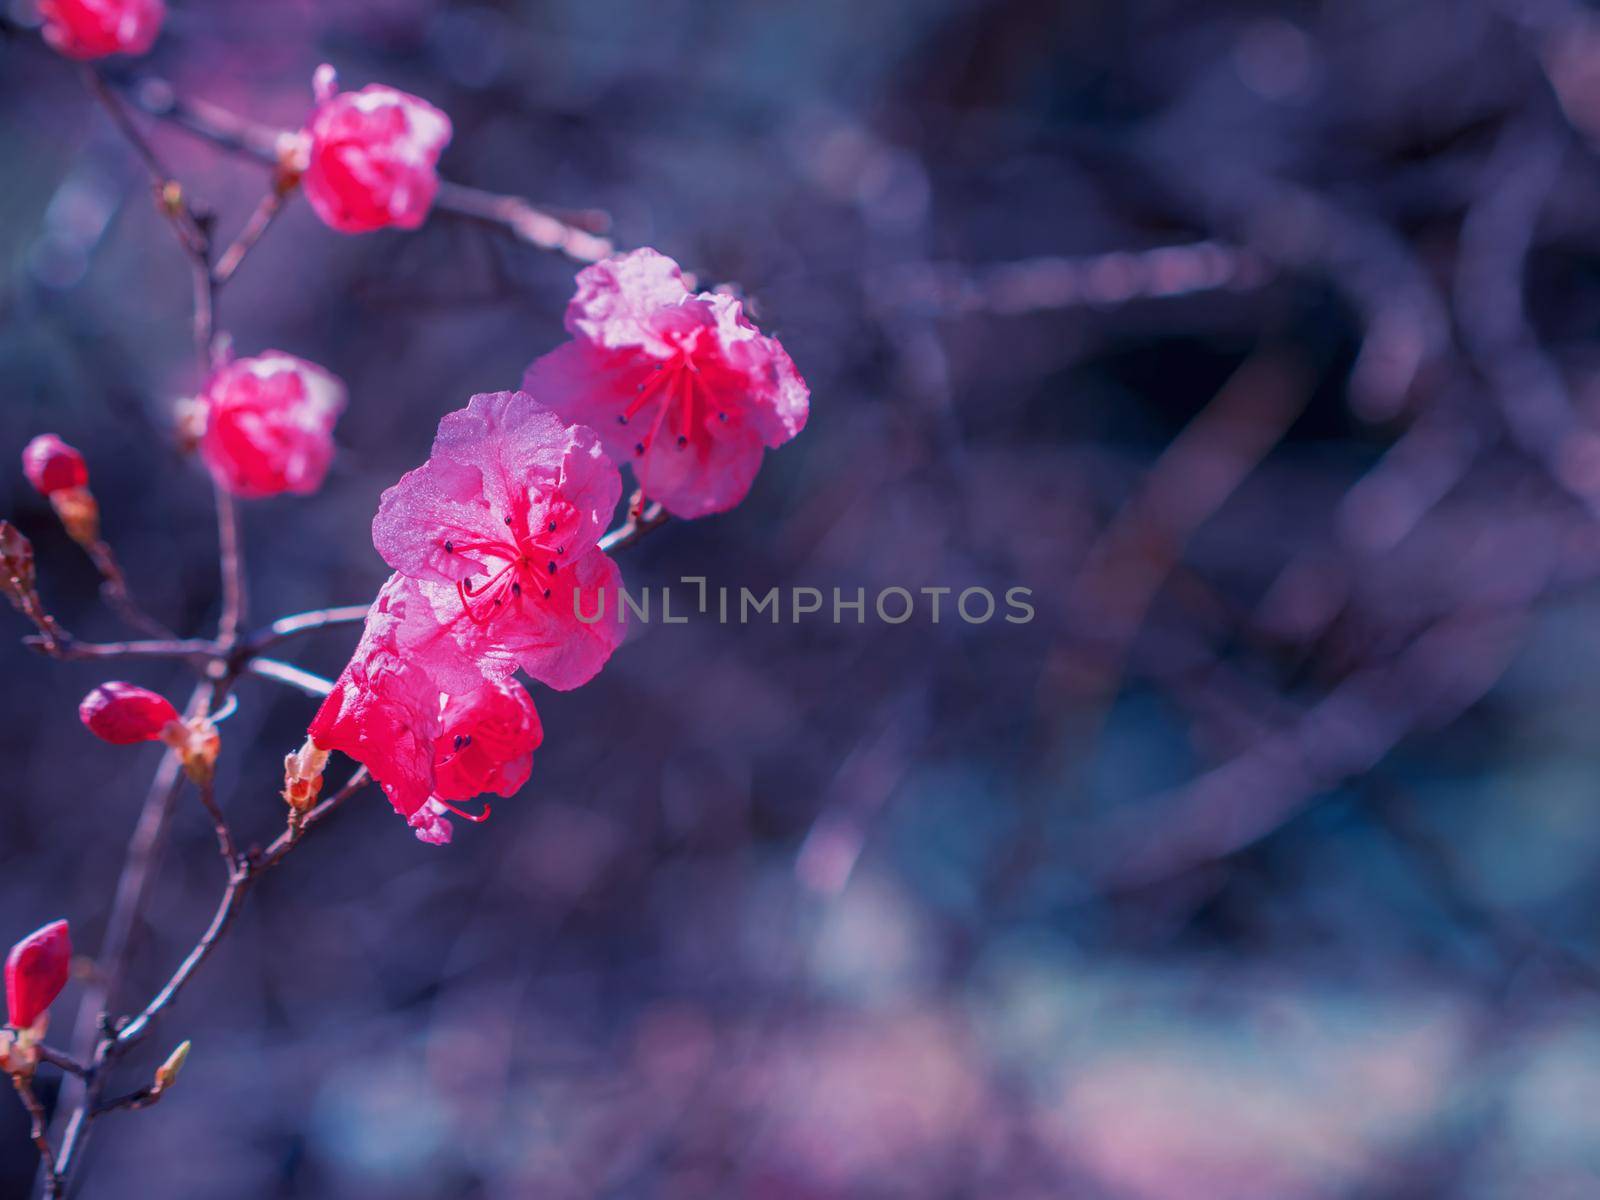 Wild rosemary flowers. Pink spring flowers. photo by Andre1ns